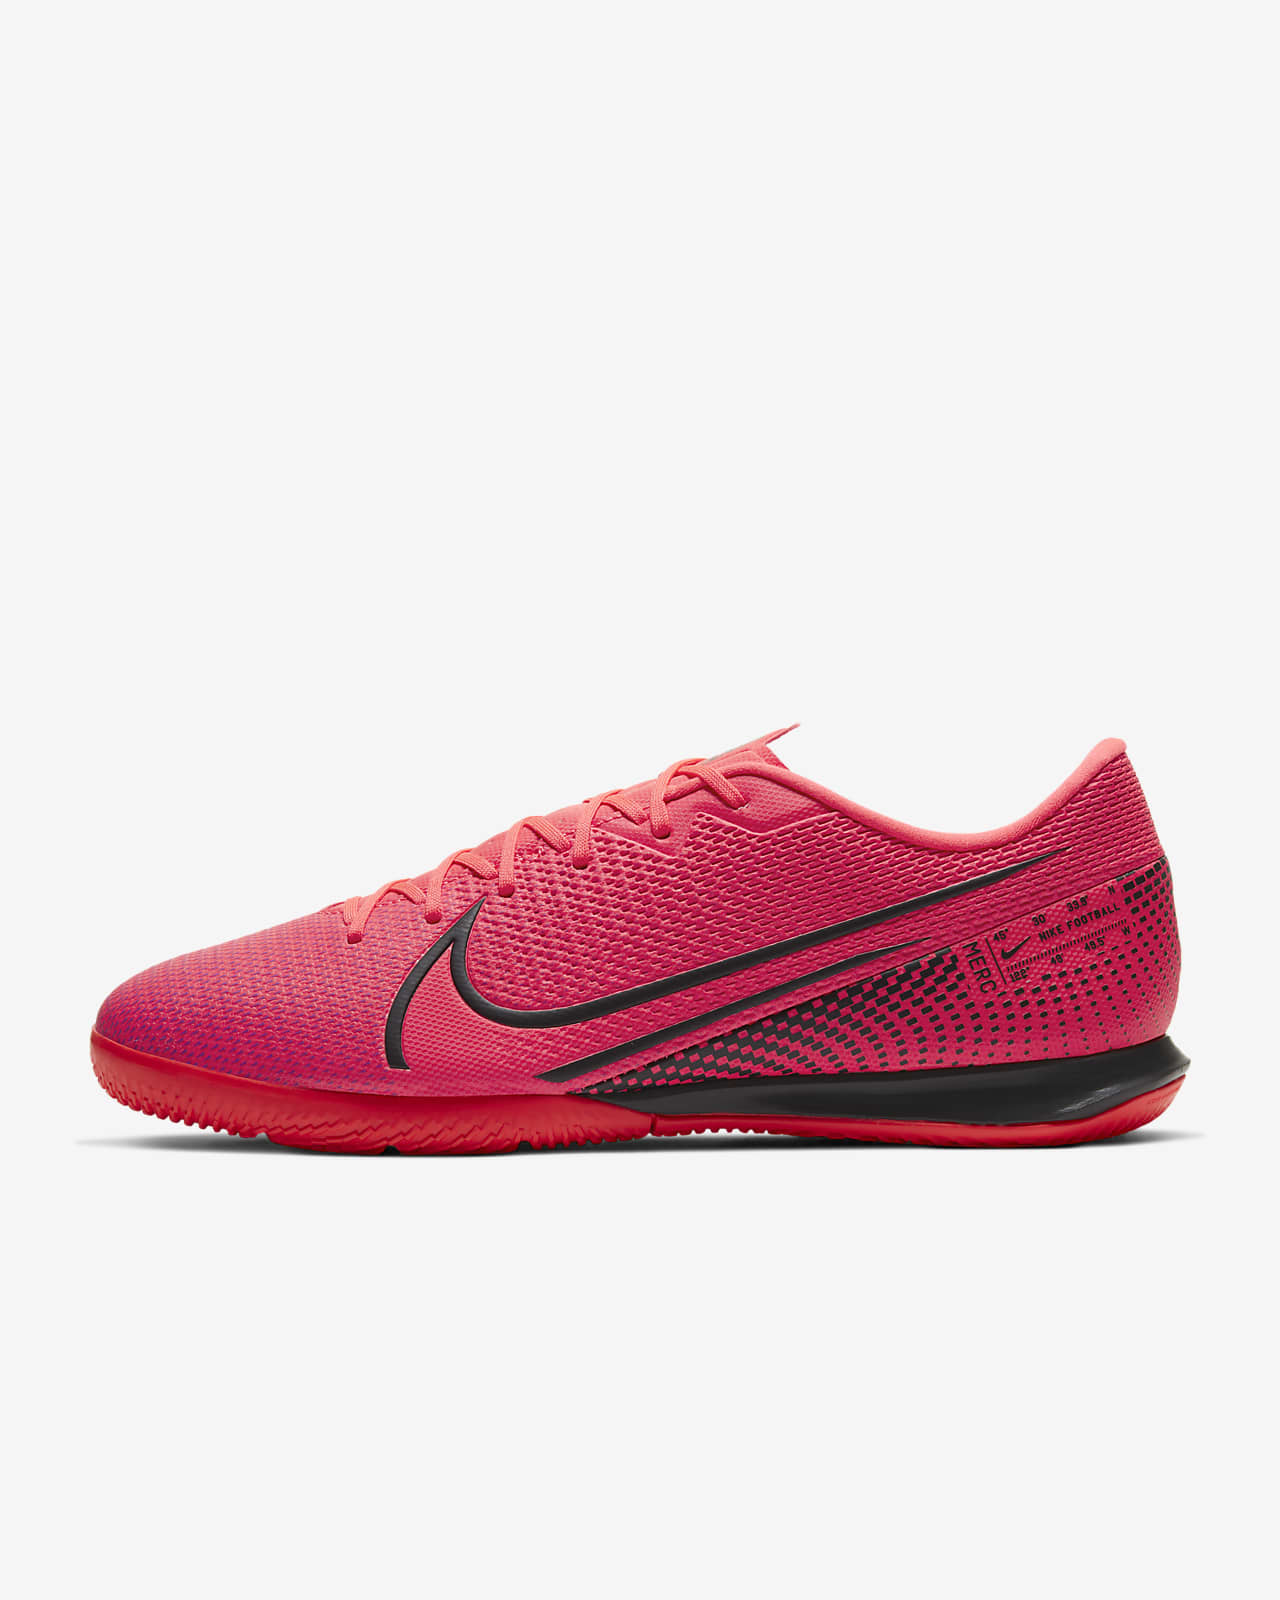 shoes nike soccer